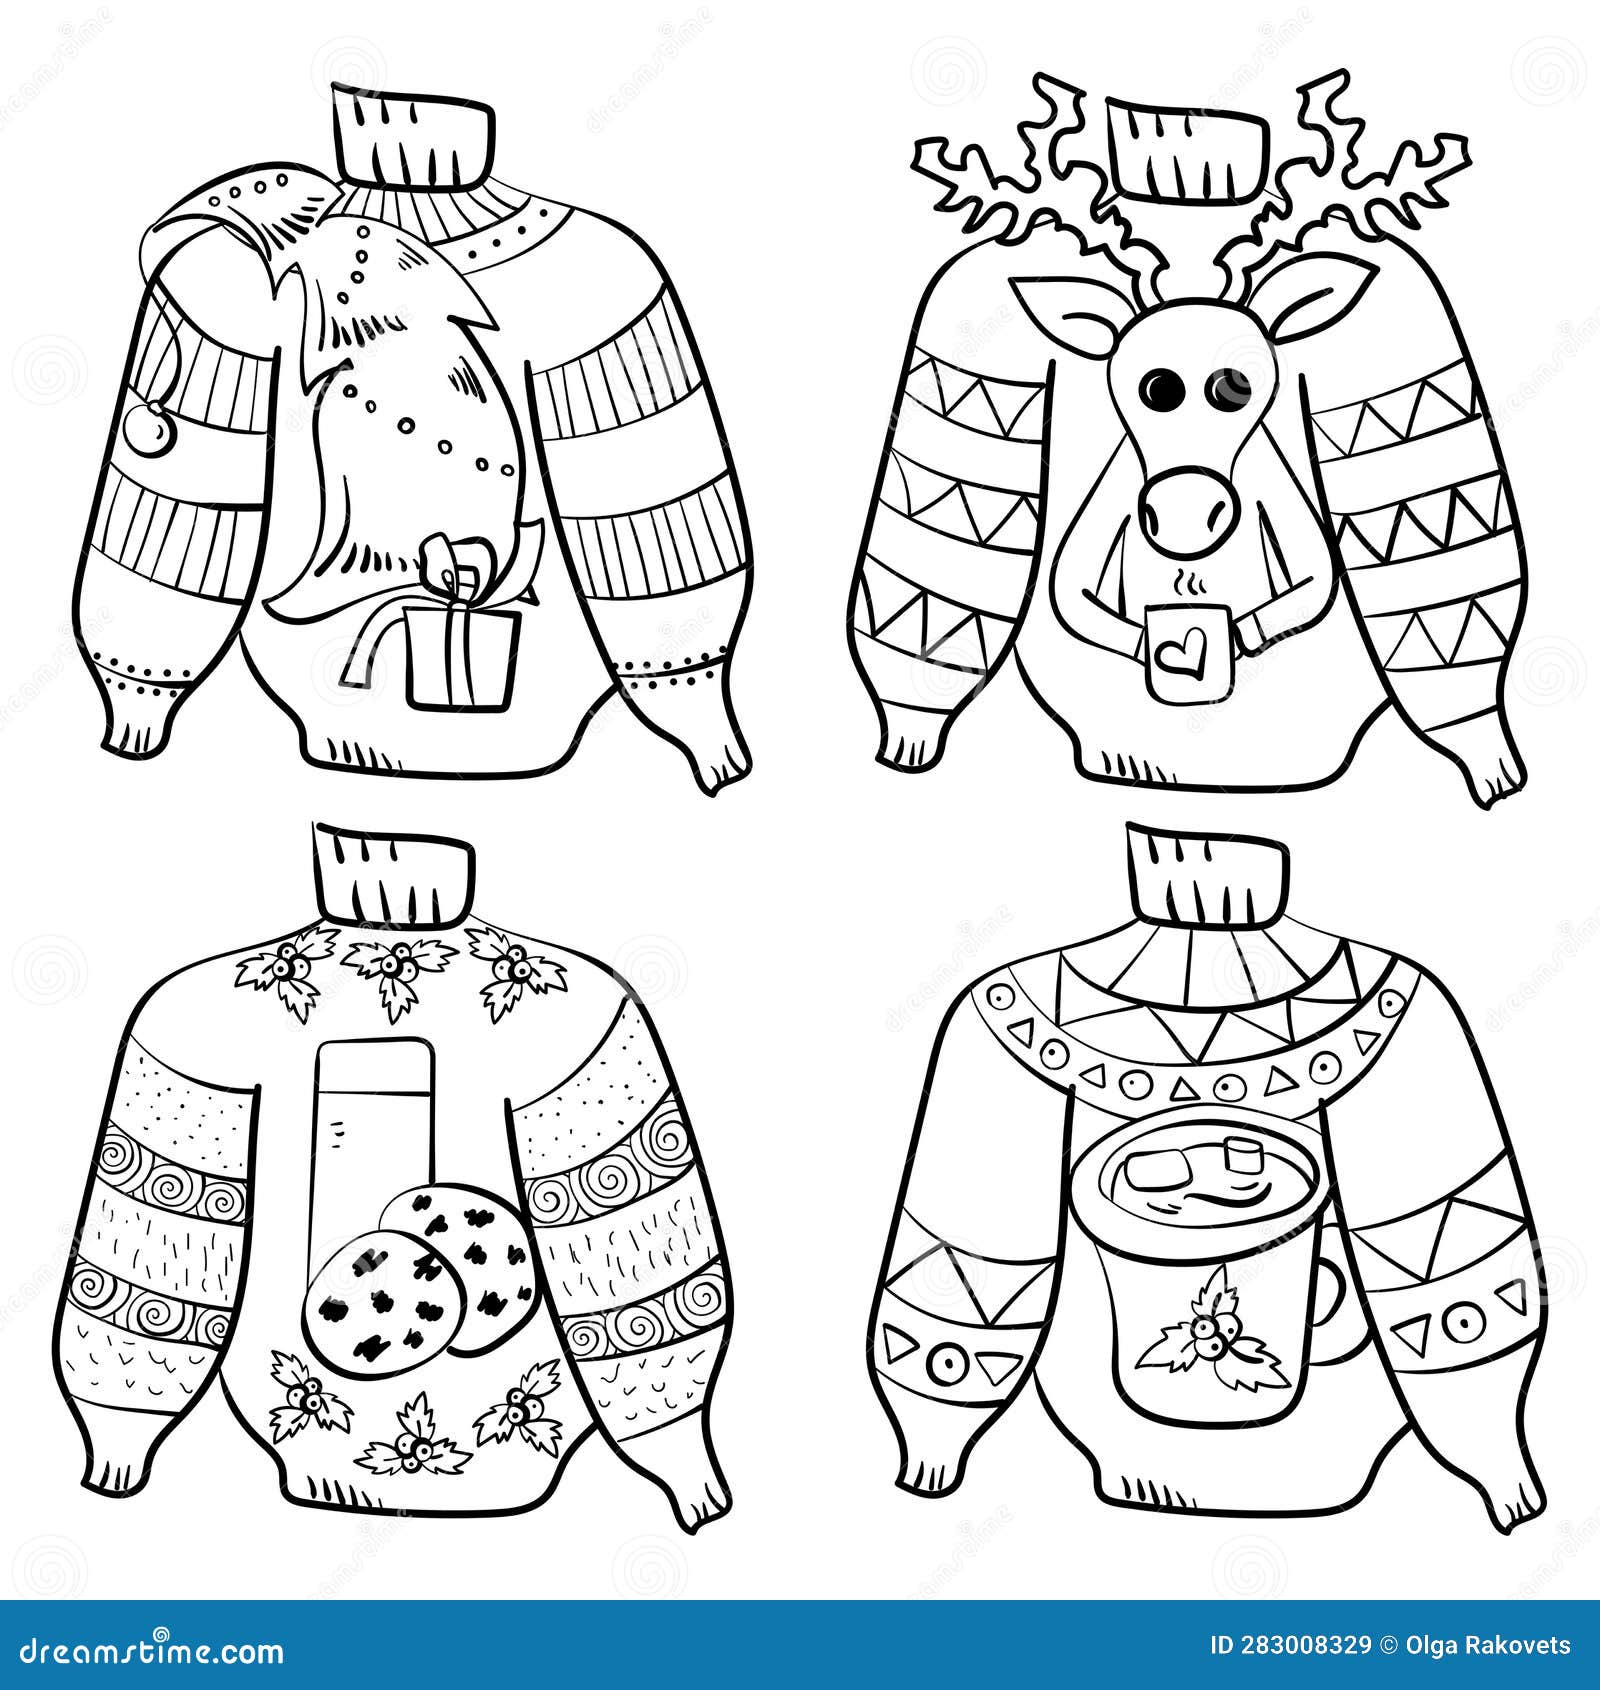 Ugly christmas sweater patterns stock illustrations â ugly christmas sweater patterns stock illustrations vectors clipart